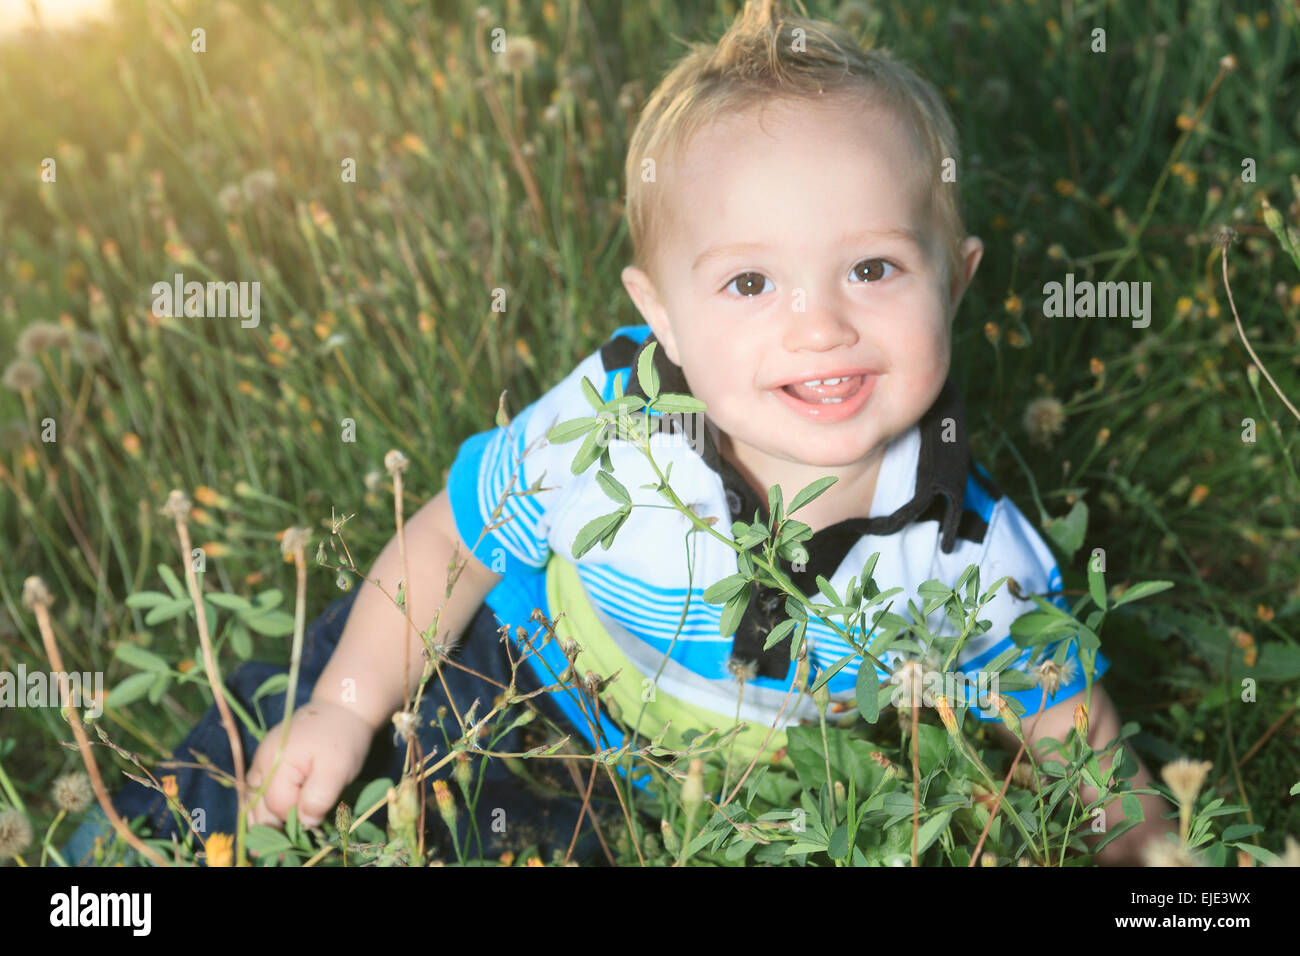 little boy at the sunset in a field Stock Photo